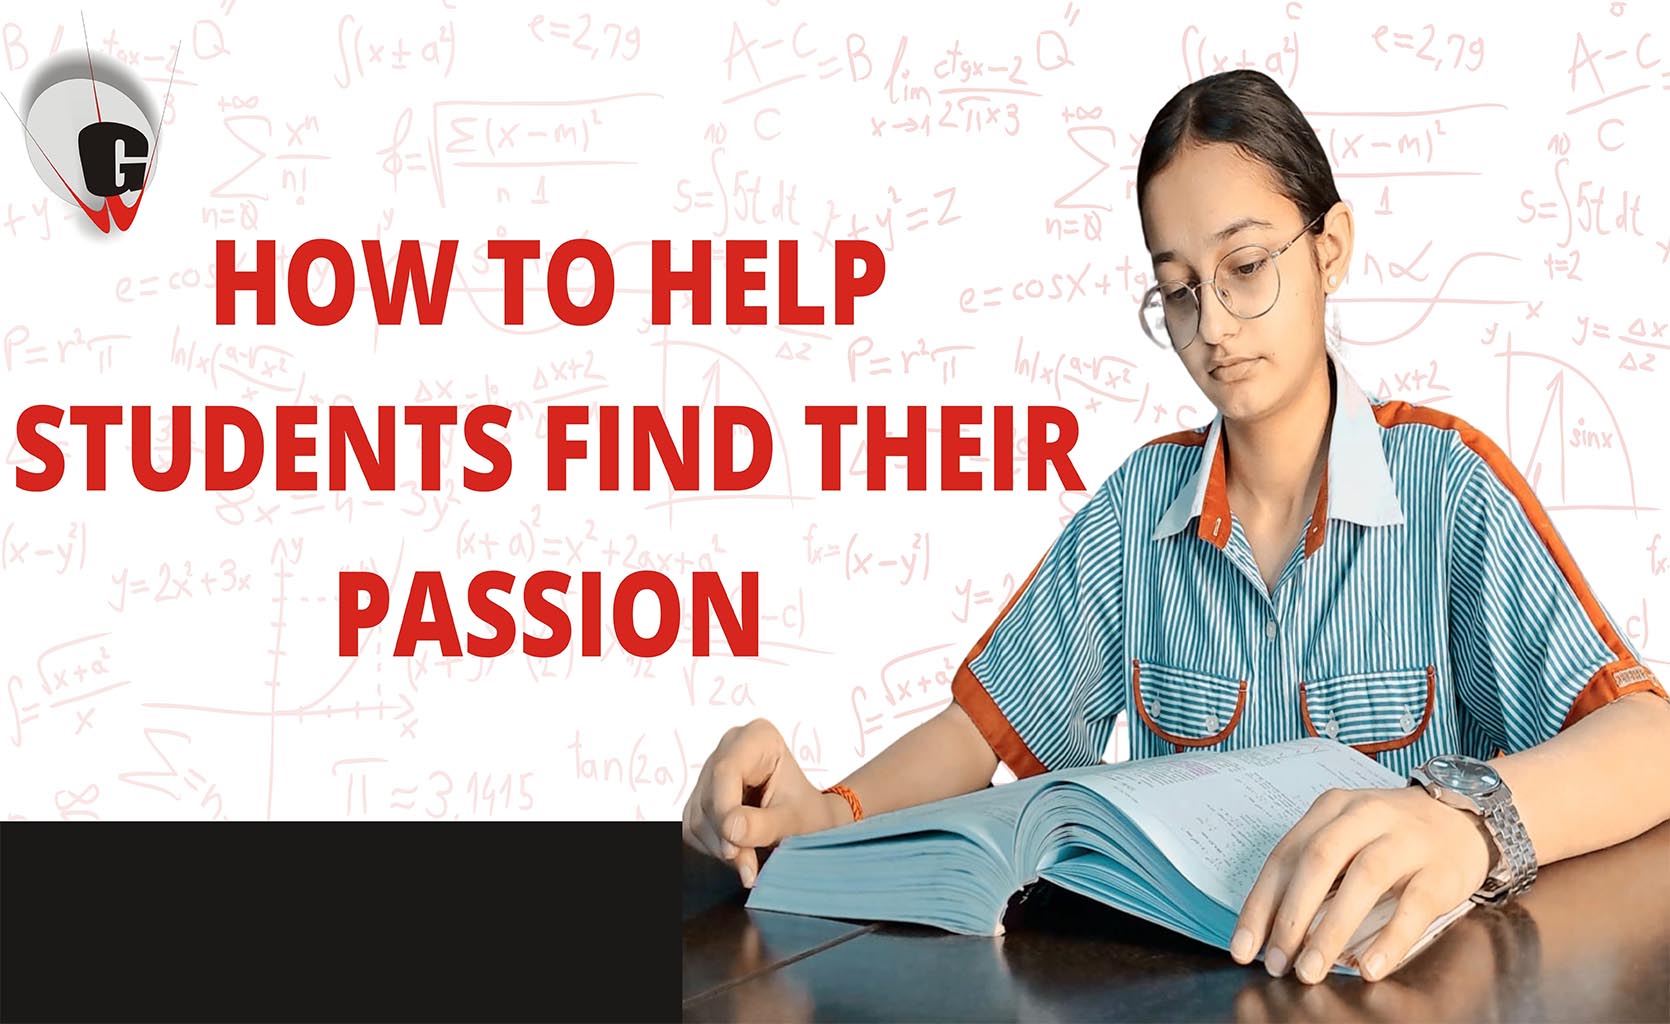 How to help students find their passion